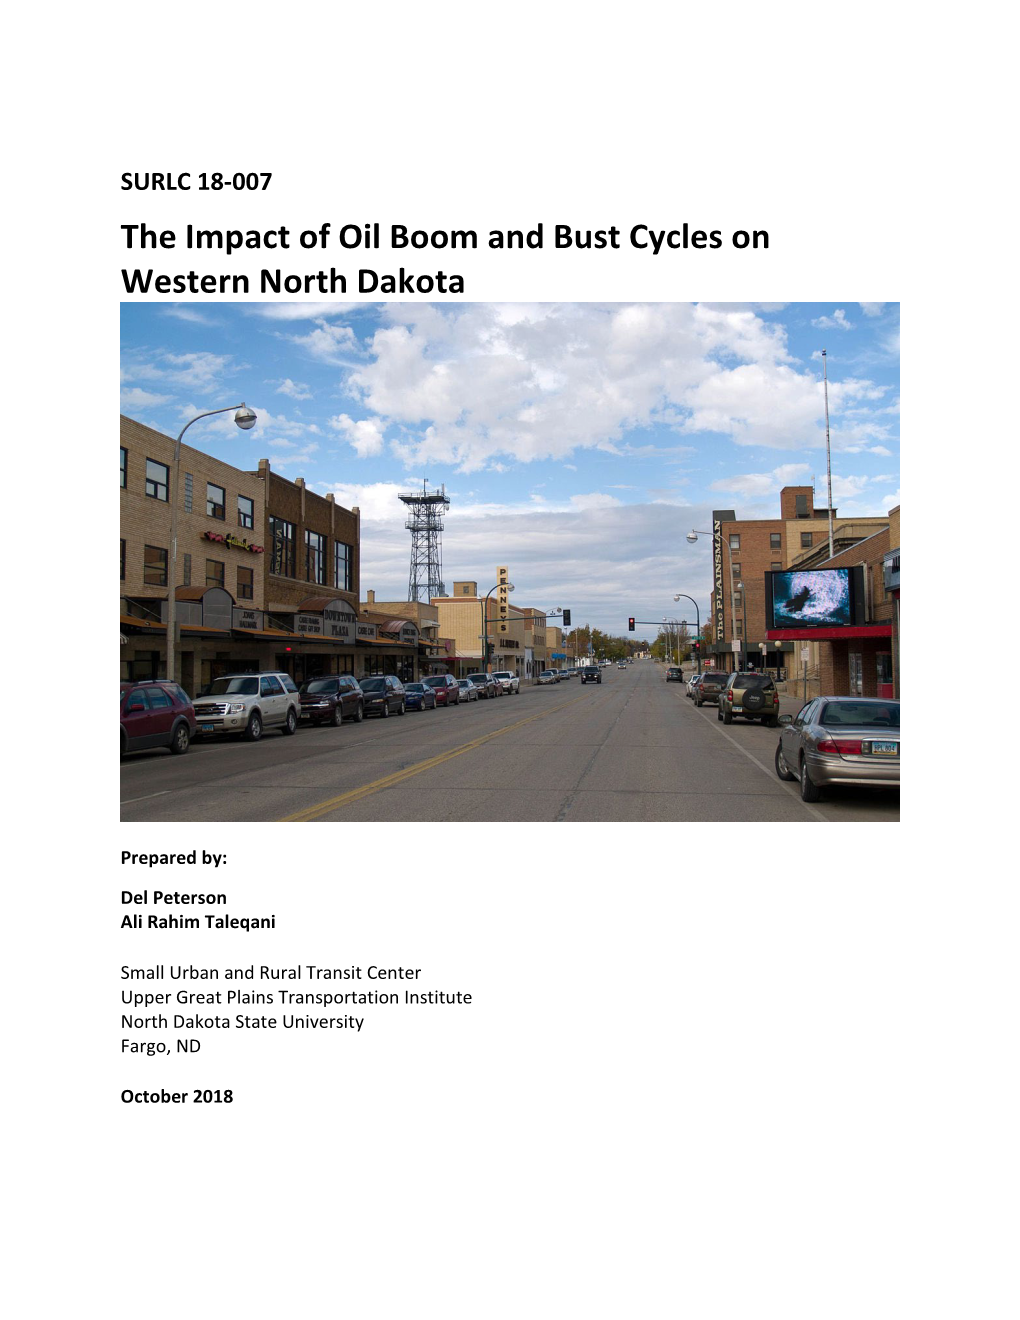 The Impact of Oil Boom and Bust Cycles on Western North Dakota